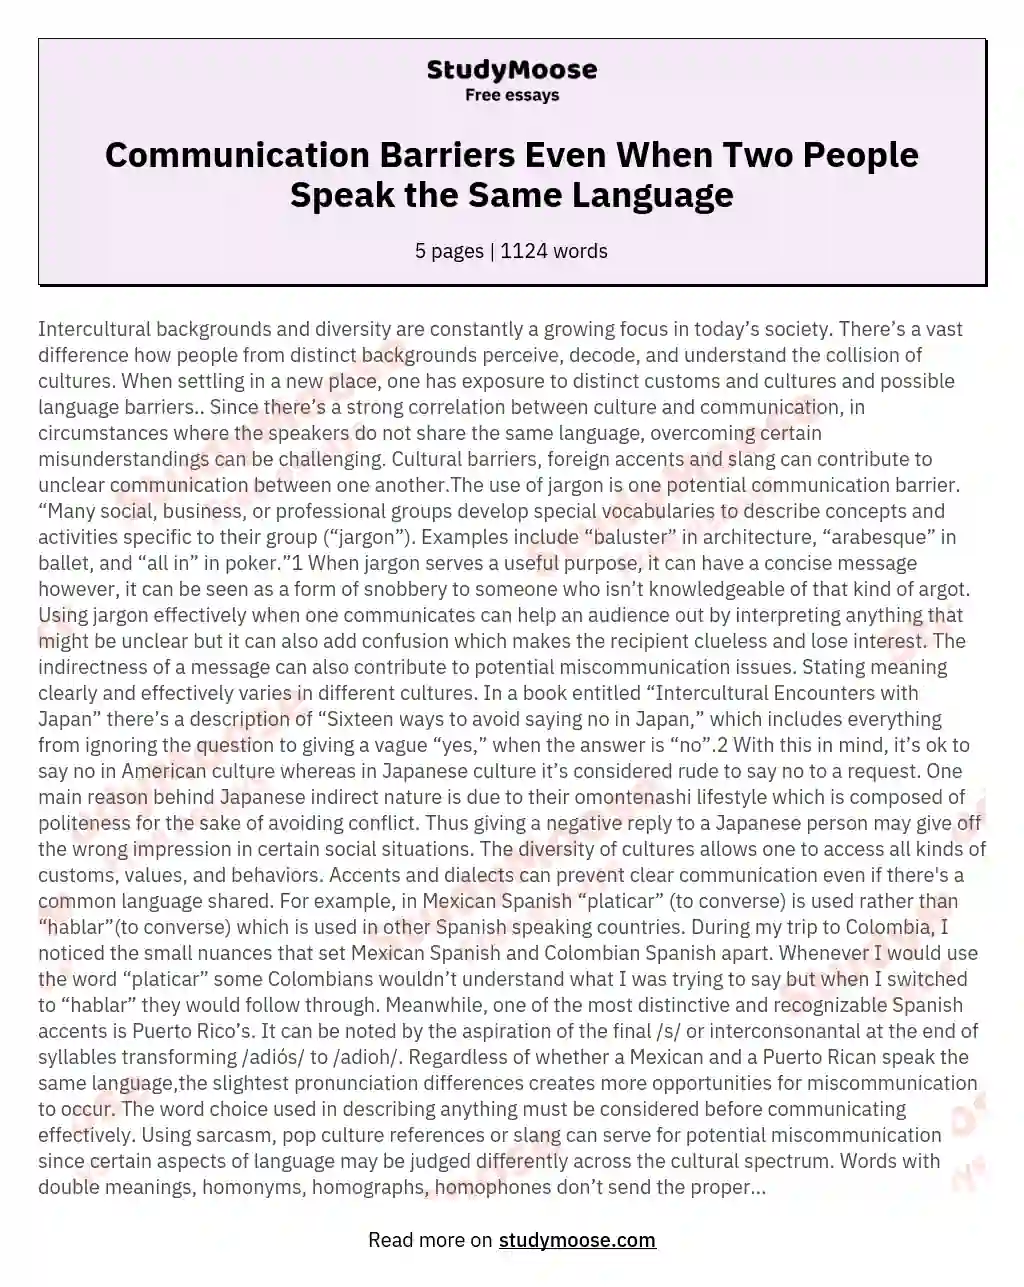 Communication Barriers Even When Two People Speak the Same Language essay